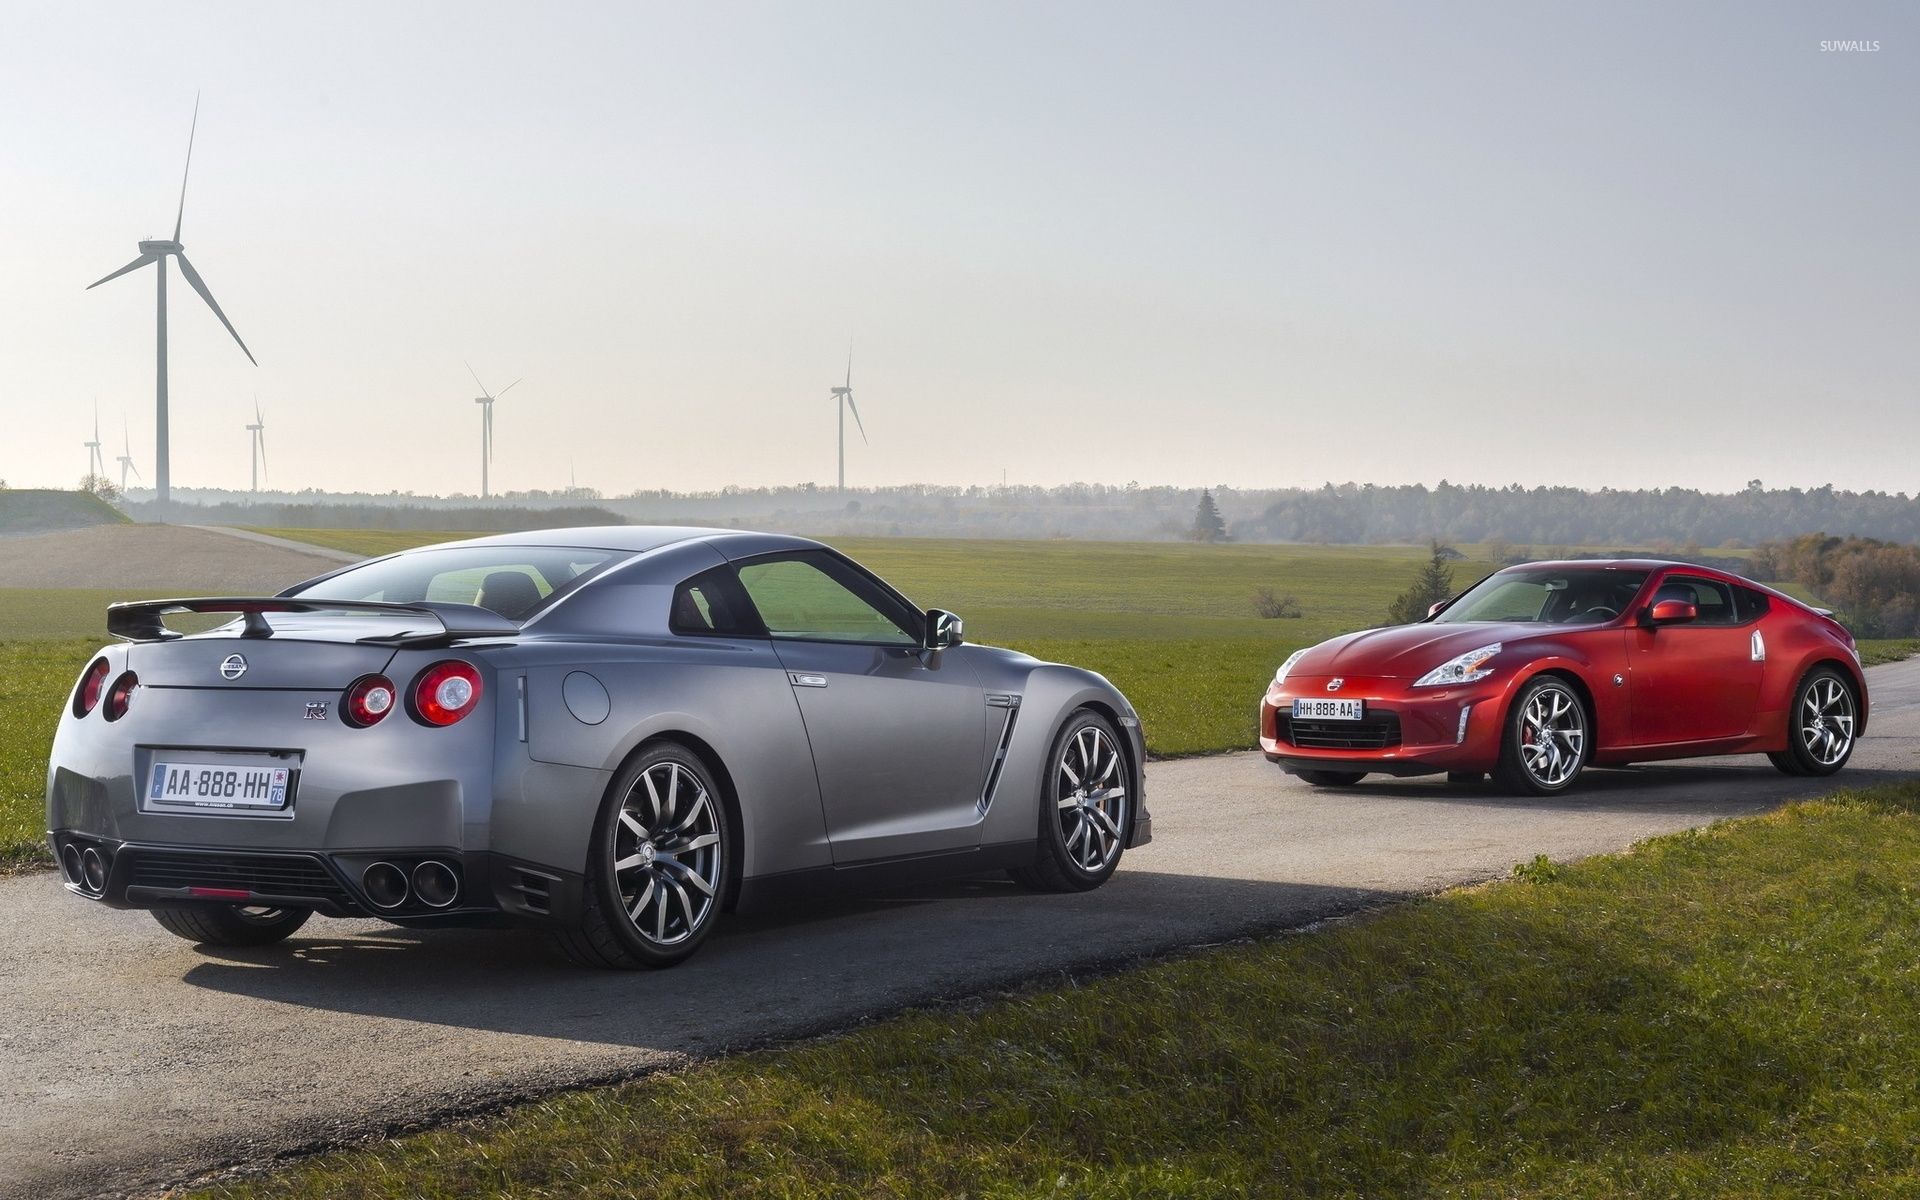 Nissan's 370Z and GT-R are both long overdue for a refresh